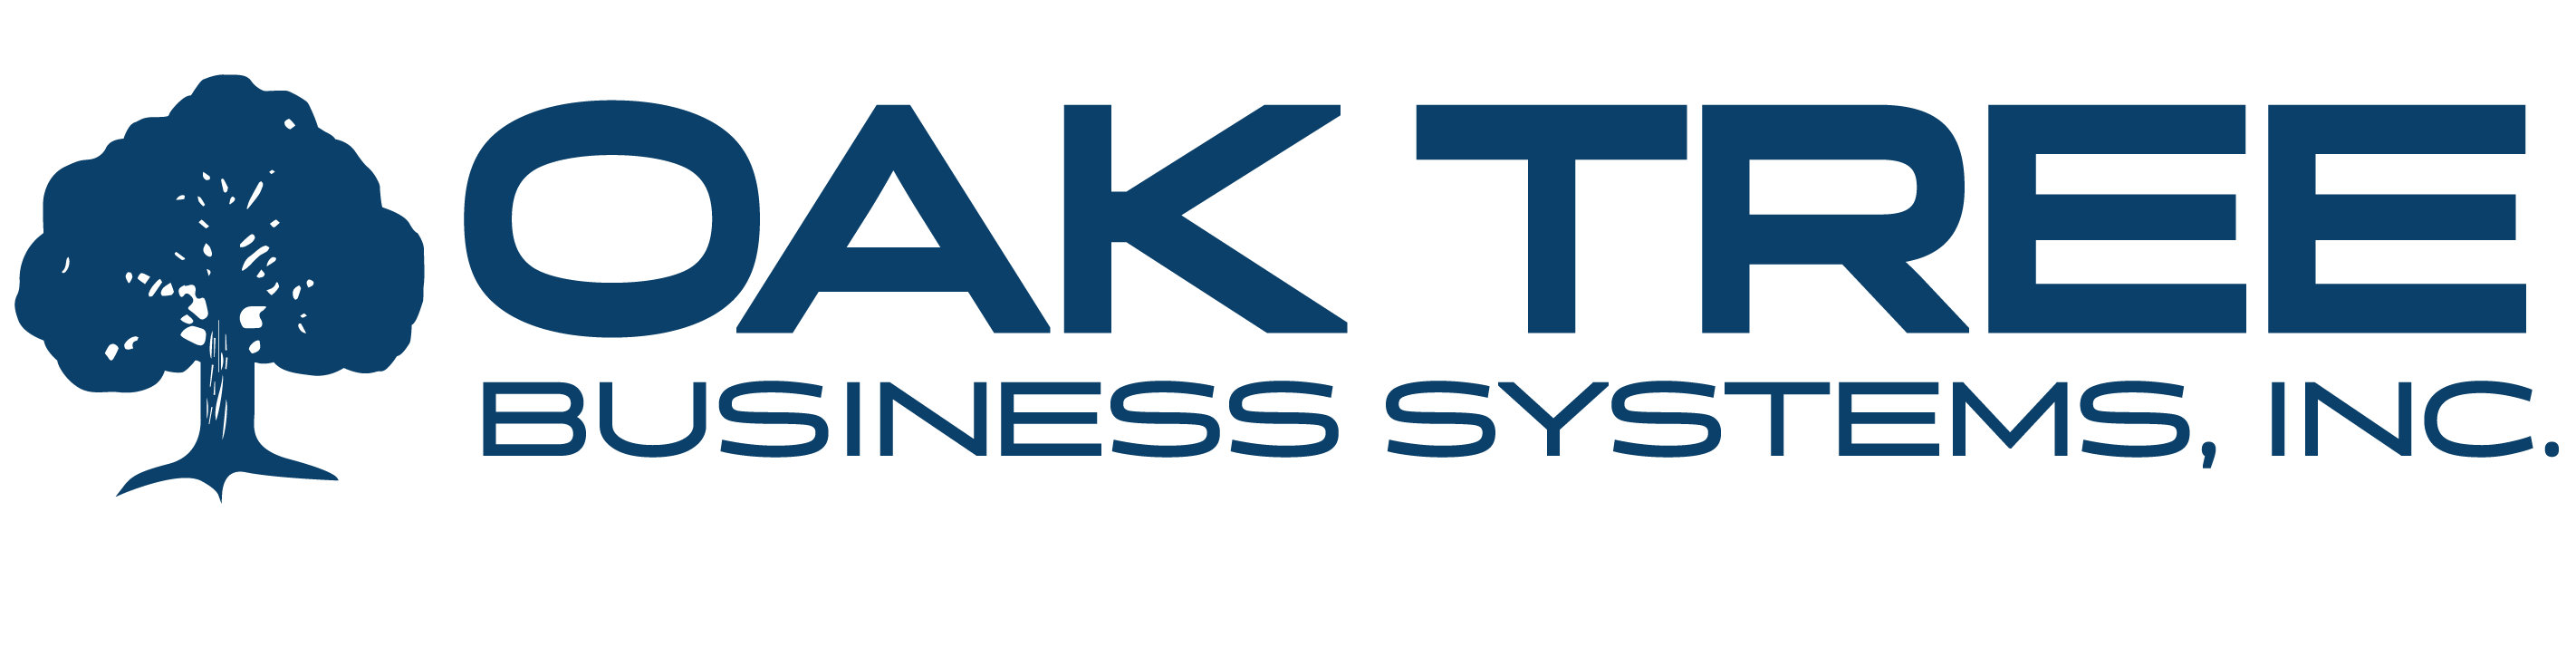 Oak Tree Business Systems, Inc. Documents for Credit Unions Logo White